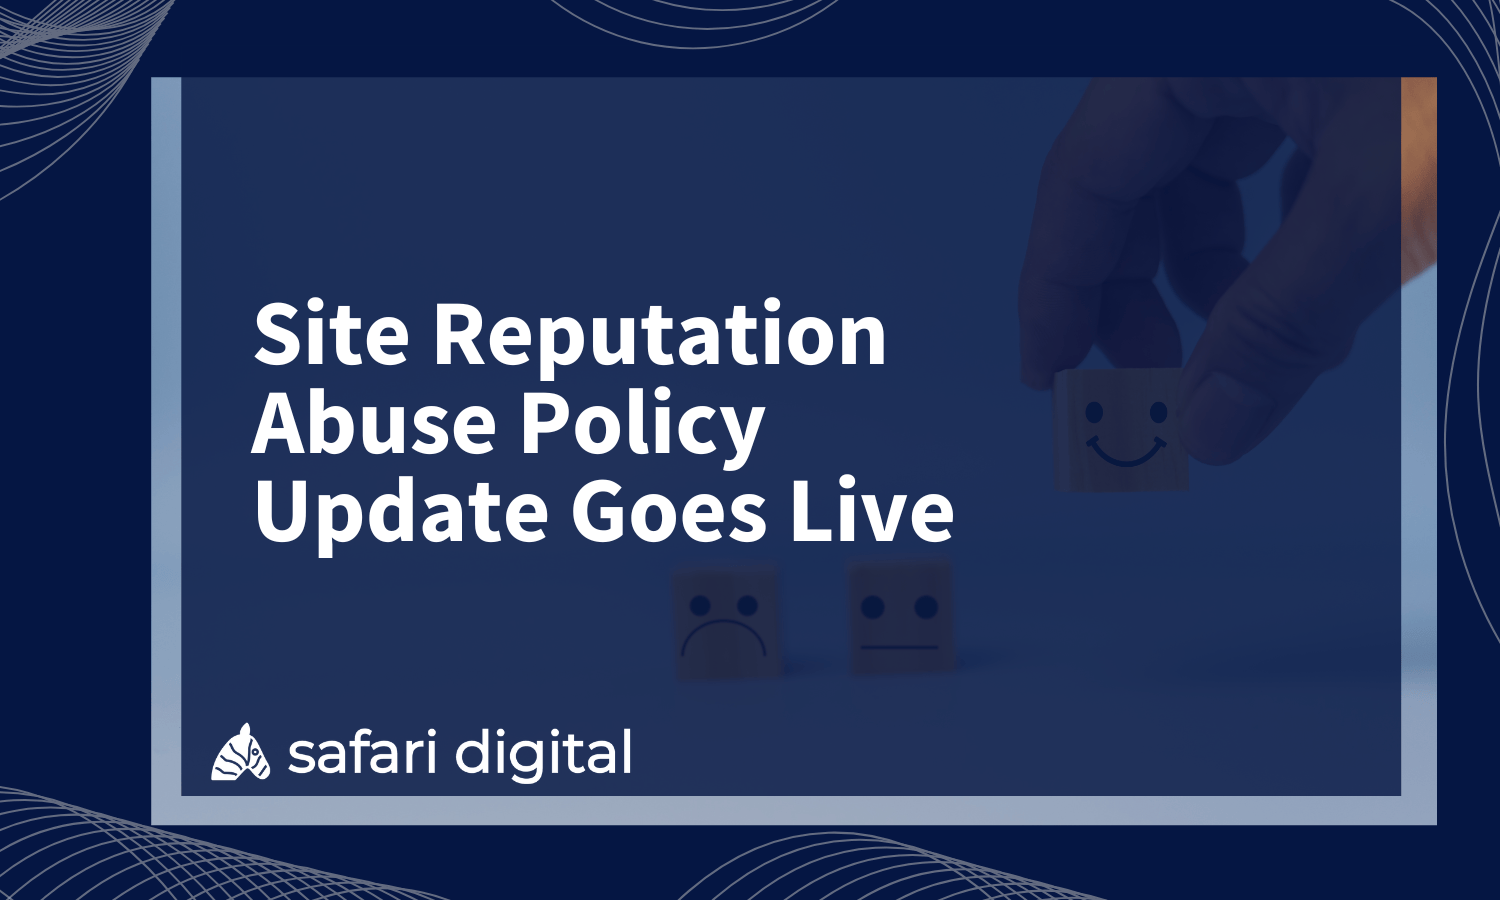 Google’s Site Reputation Abuse Policy Update Goes Live - Cover Image